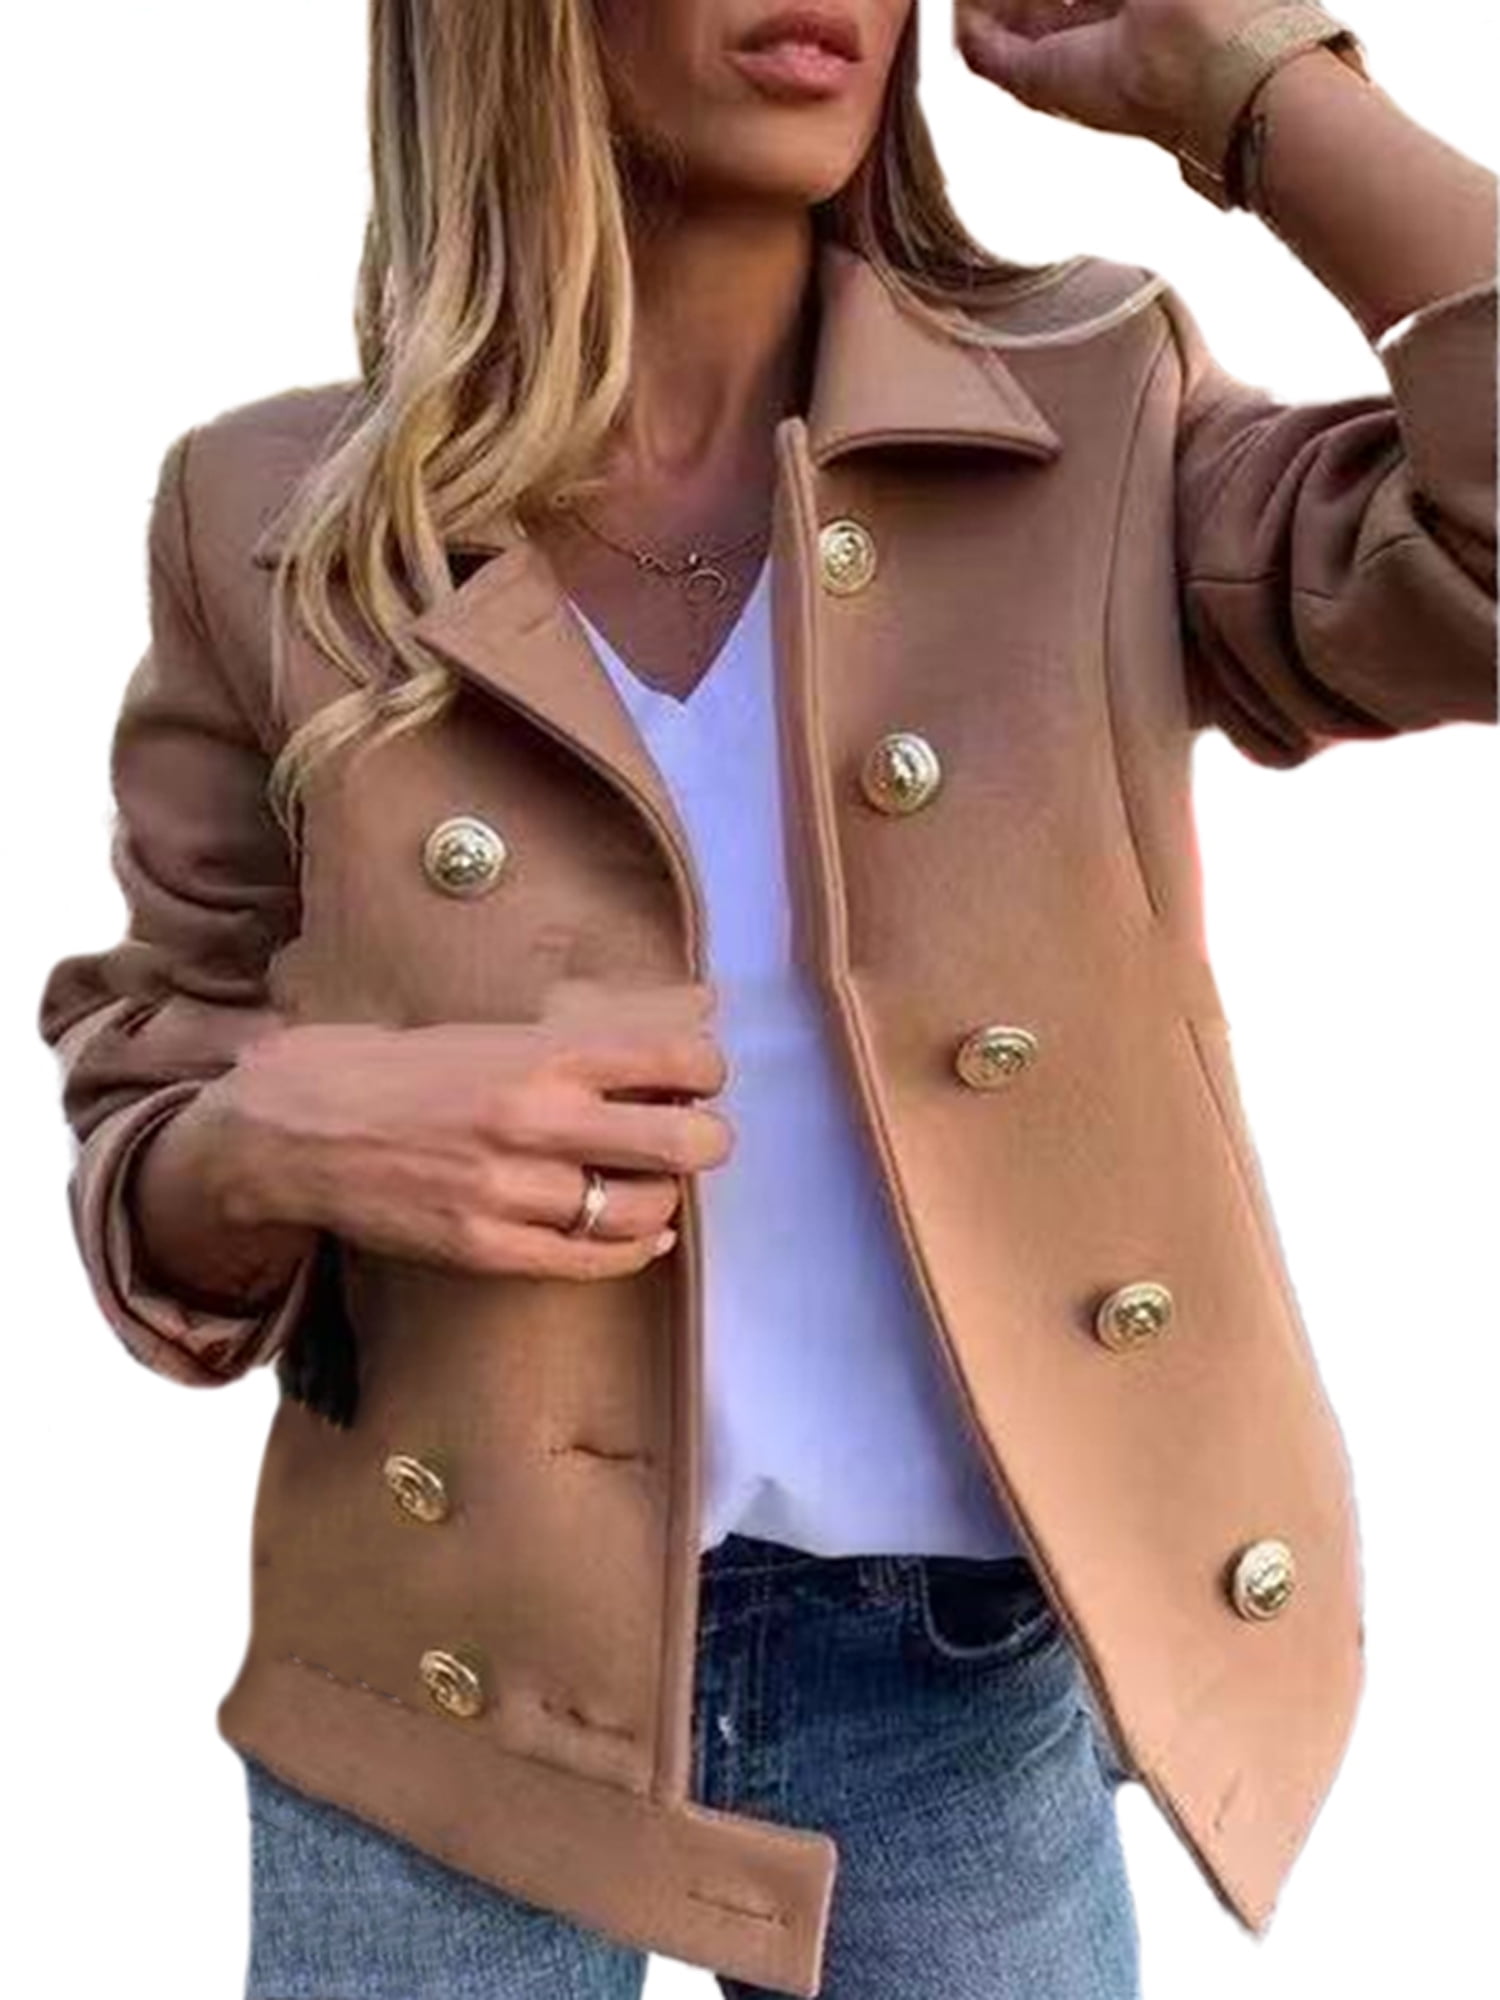 Tomatoa Top Women Coat Ladies Cardigan Coat Faux Suede Warm Jacket Zipper Up Front Outwear with Pockets Casual Jacket Overcoat Outercoat Blouse Tops